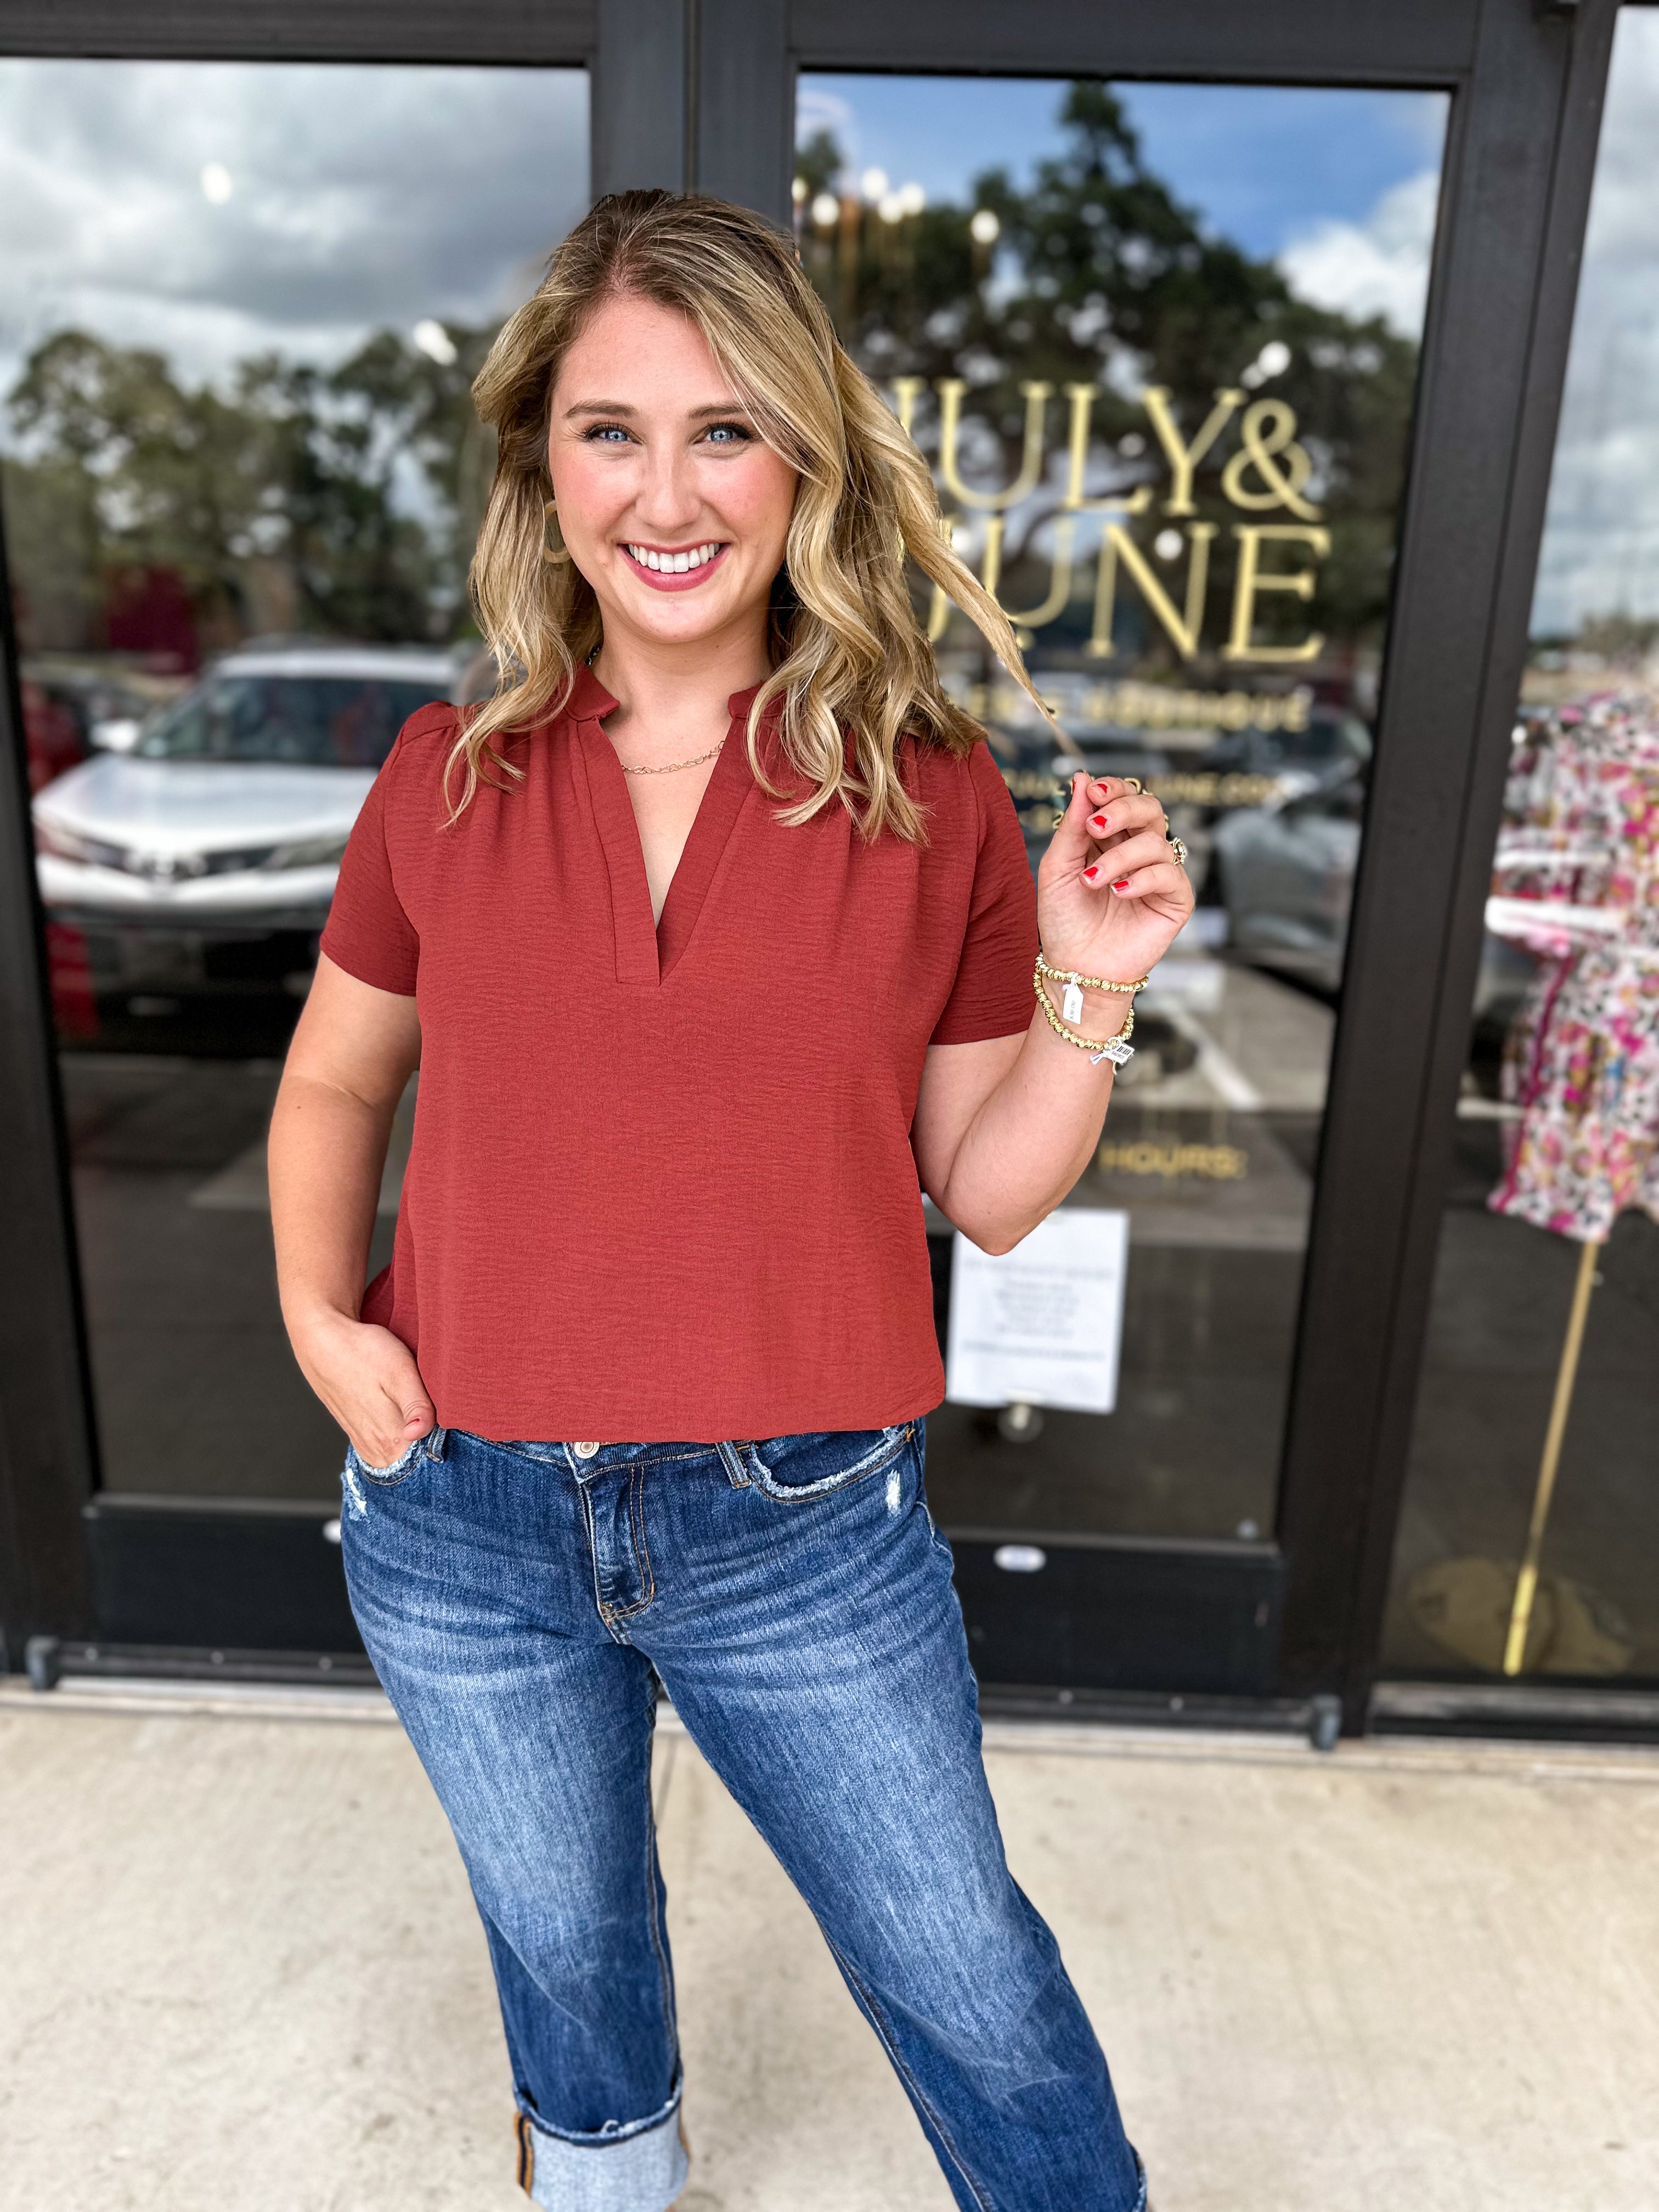 The Classic Cut Blouse - Rust-200 Fashion Blouses-ENTRO-July & June Women's Fashion Boutique Located in San Antonio, Texas